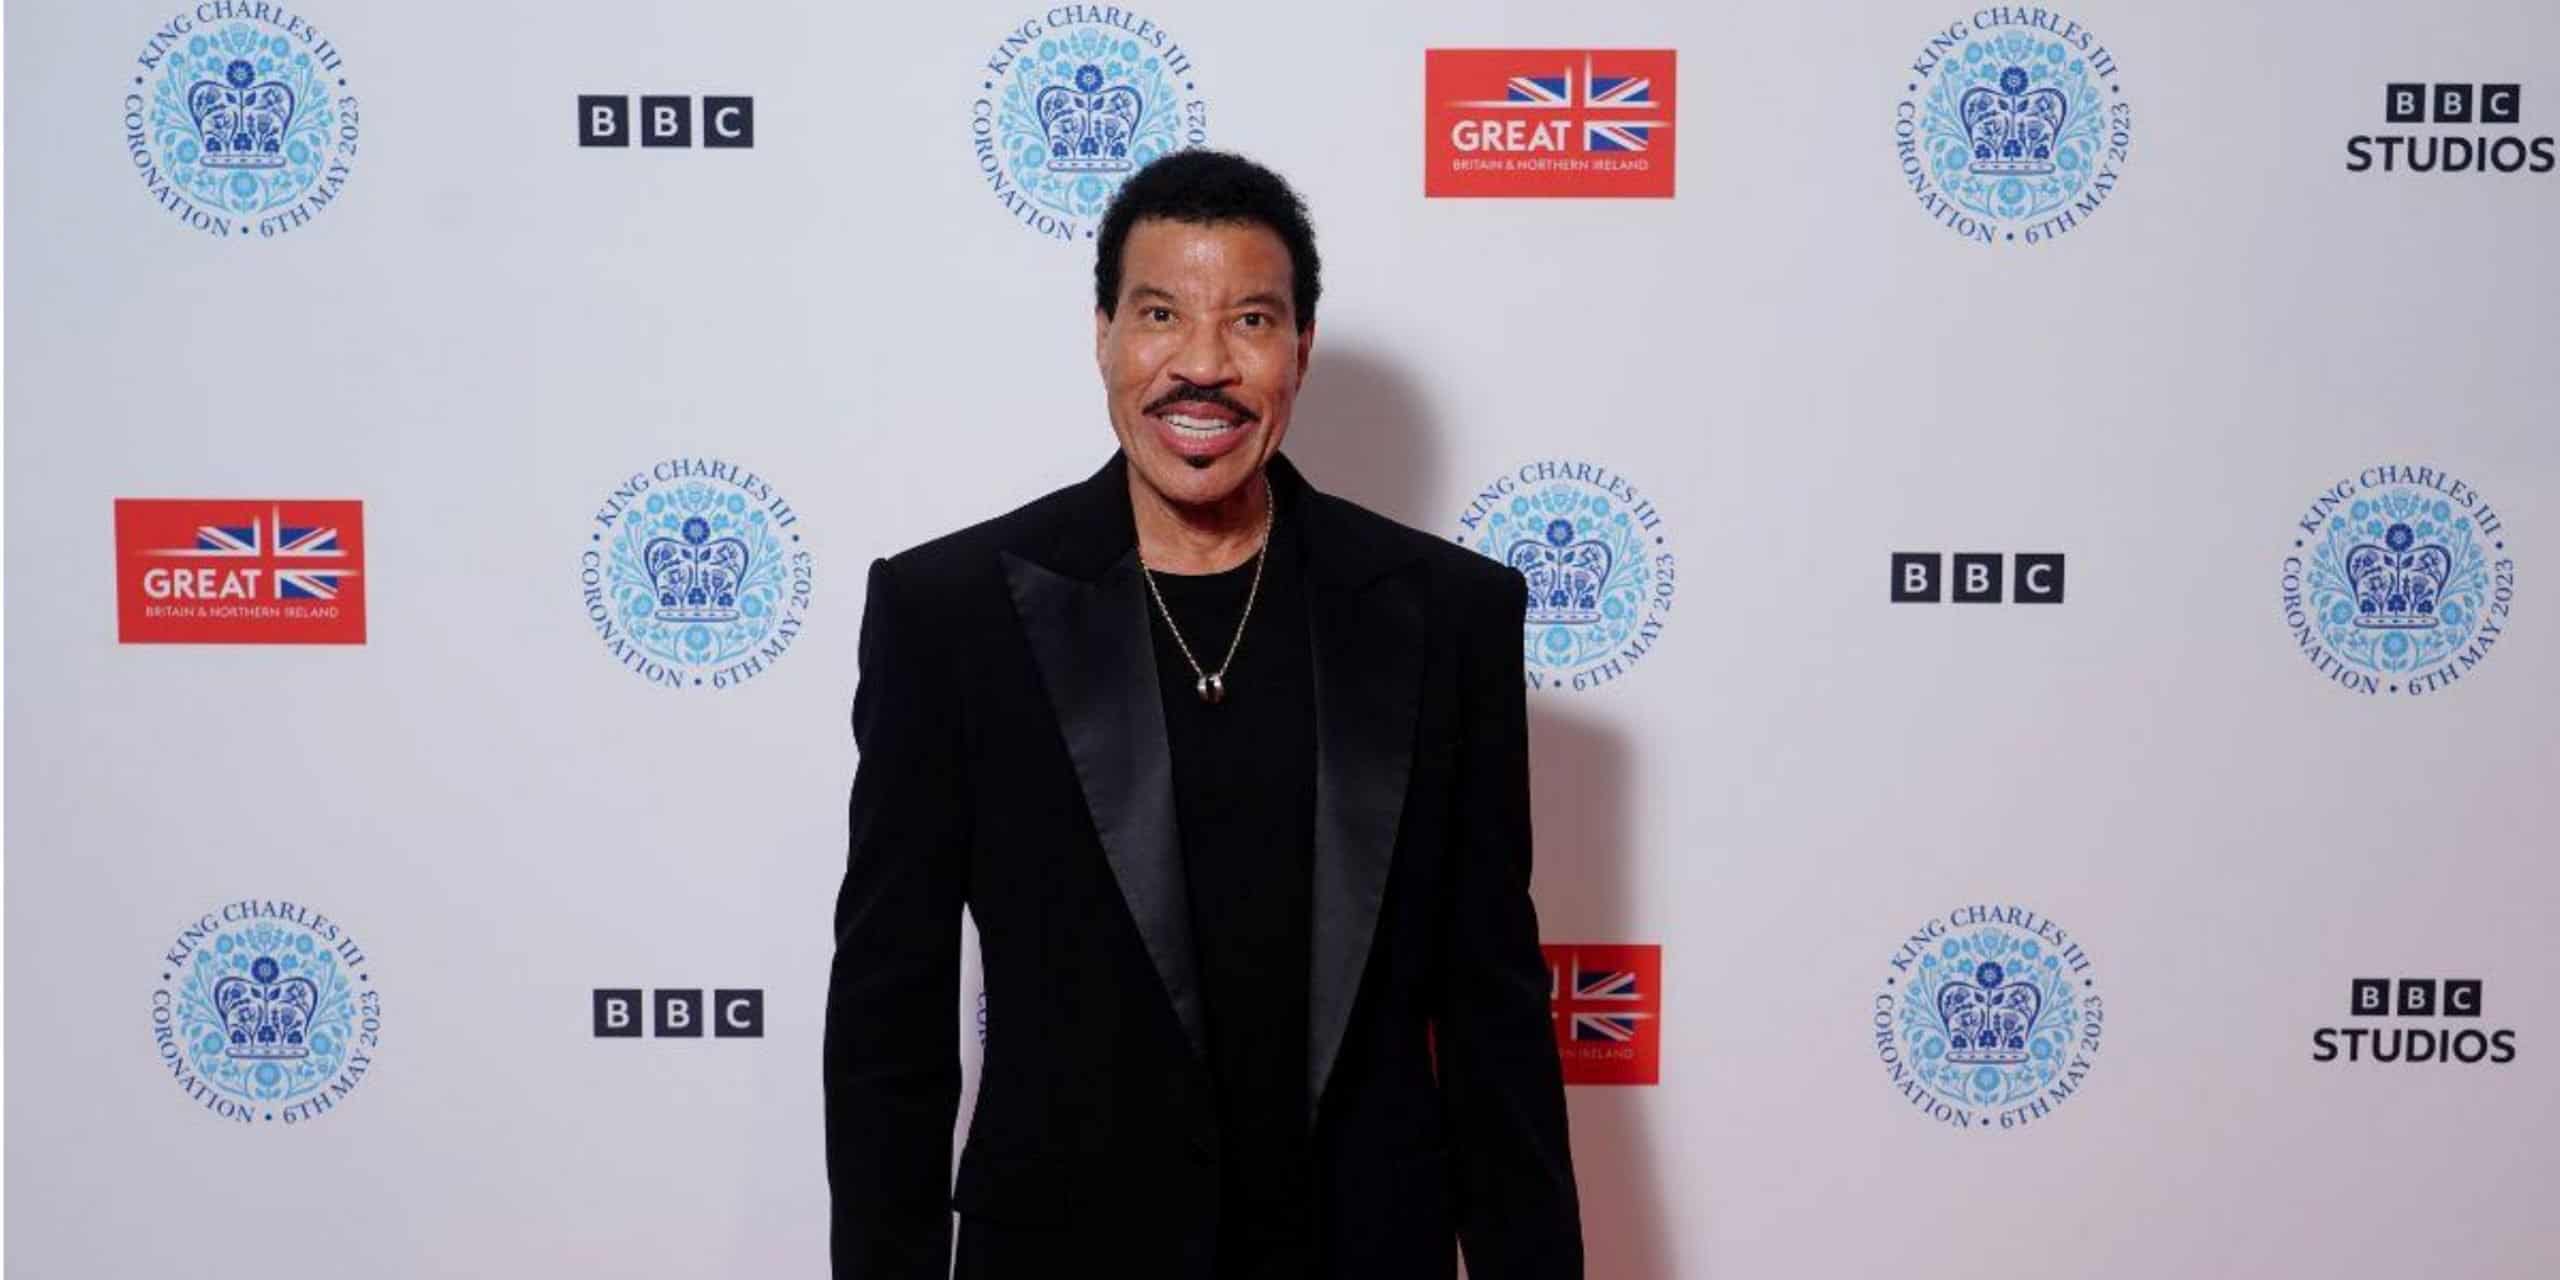 Lionel Richie at the King Charles III Coronation